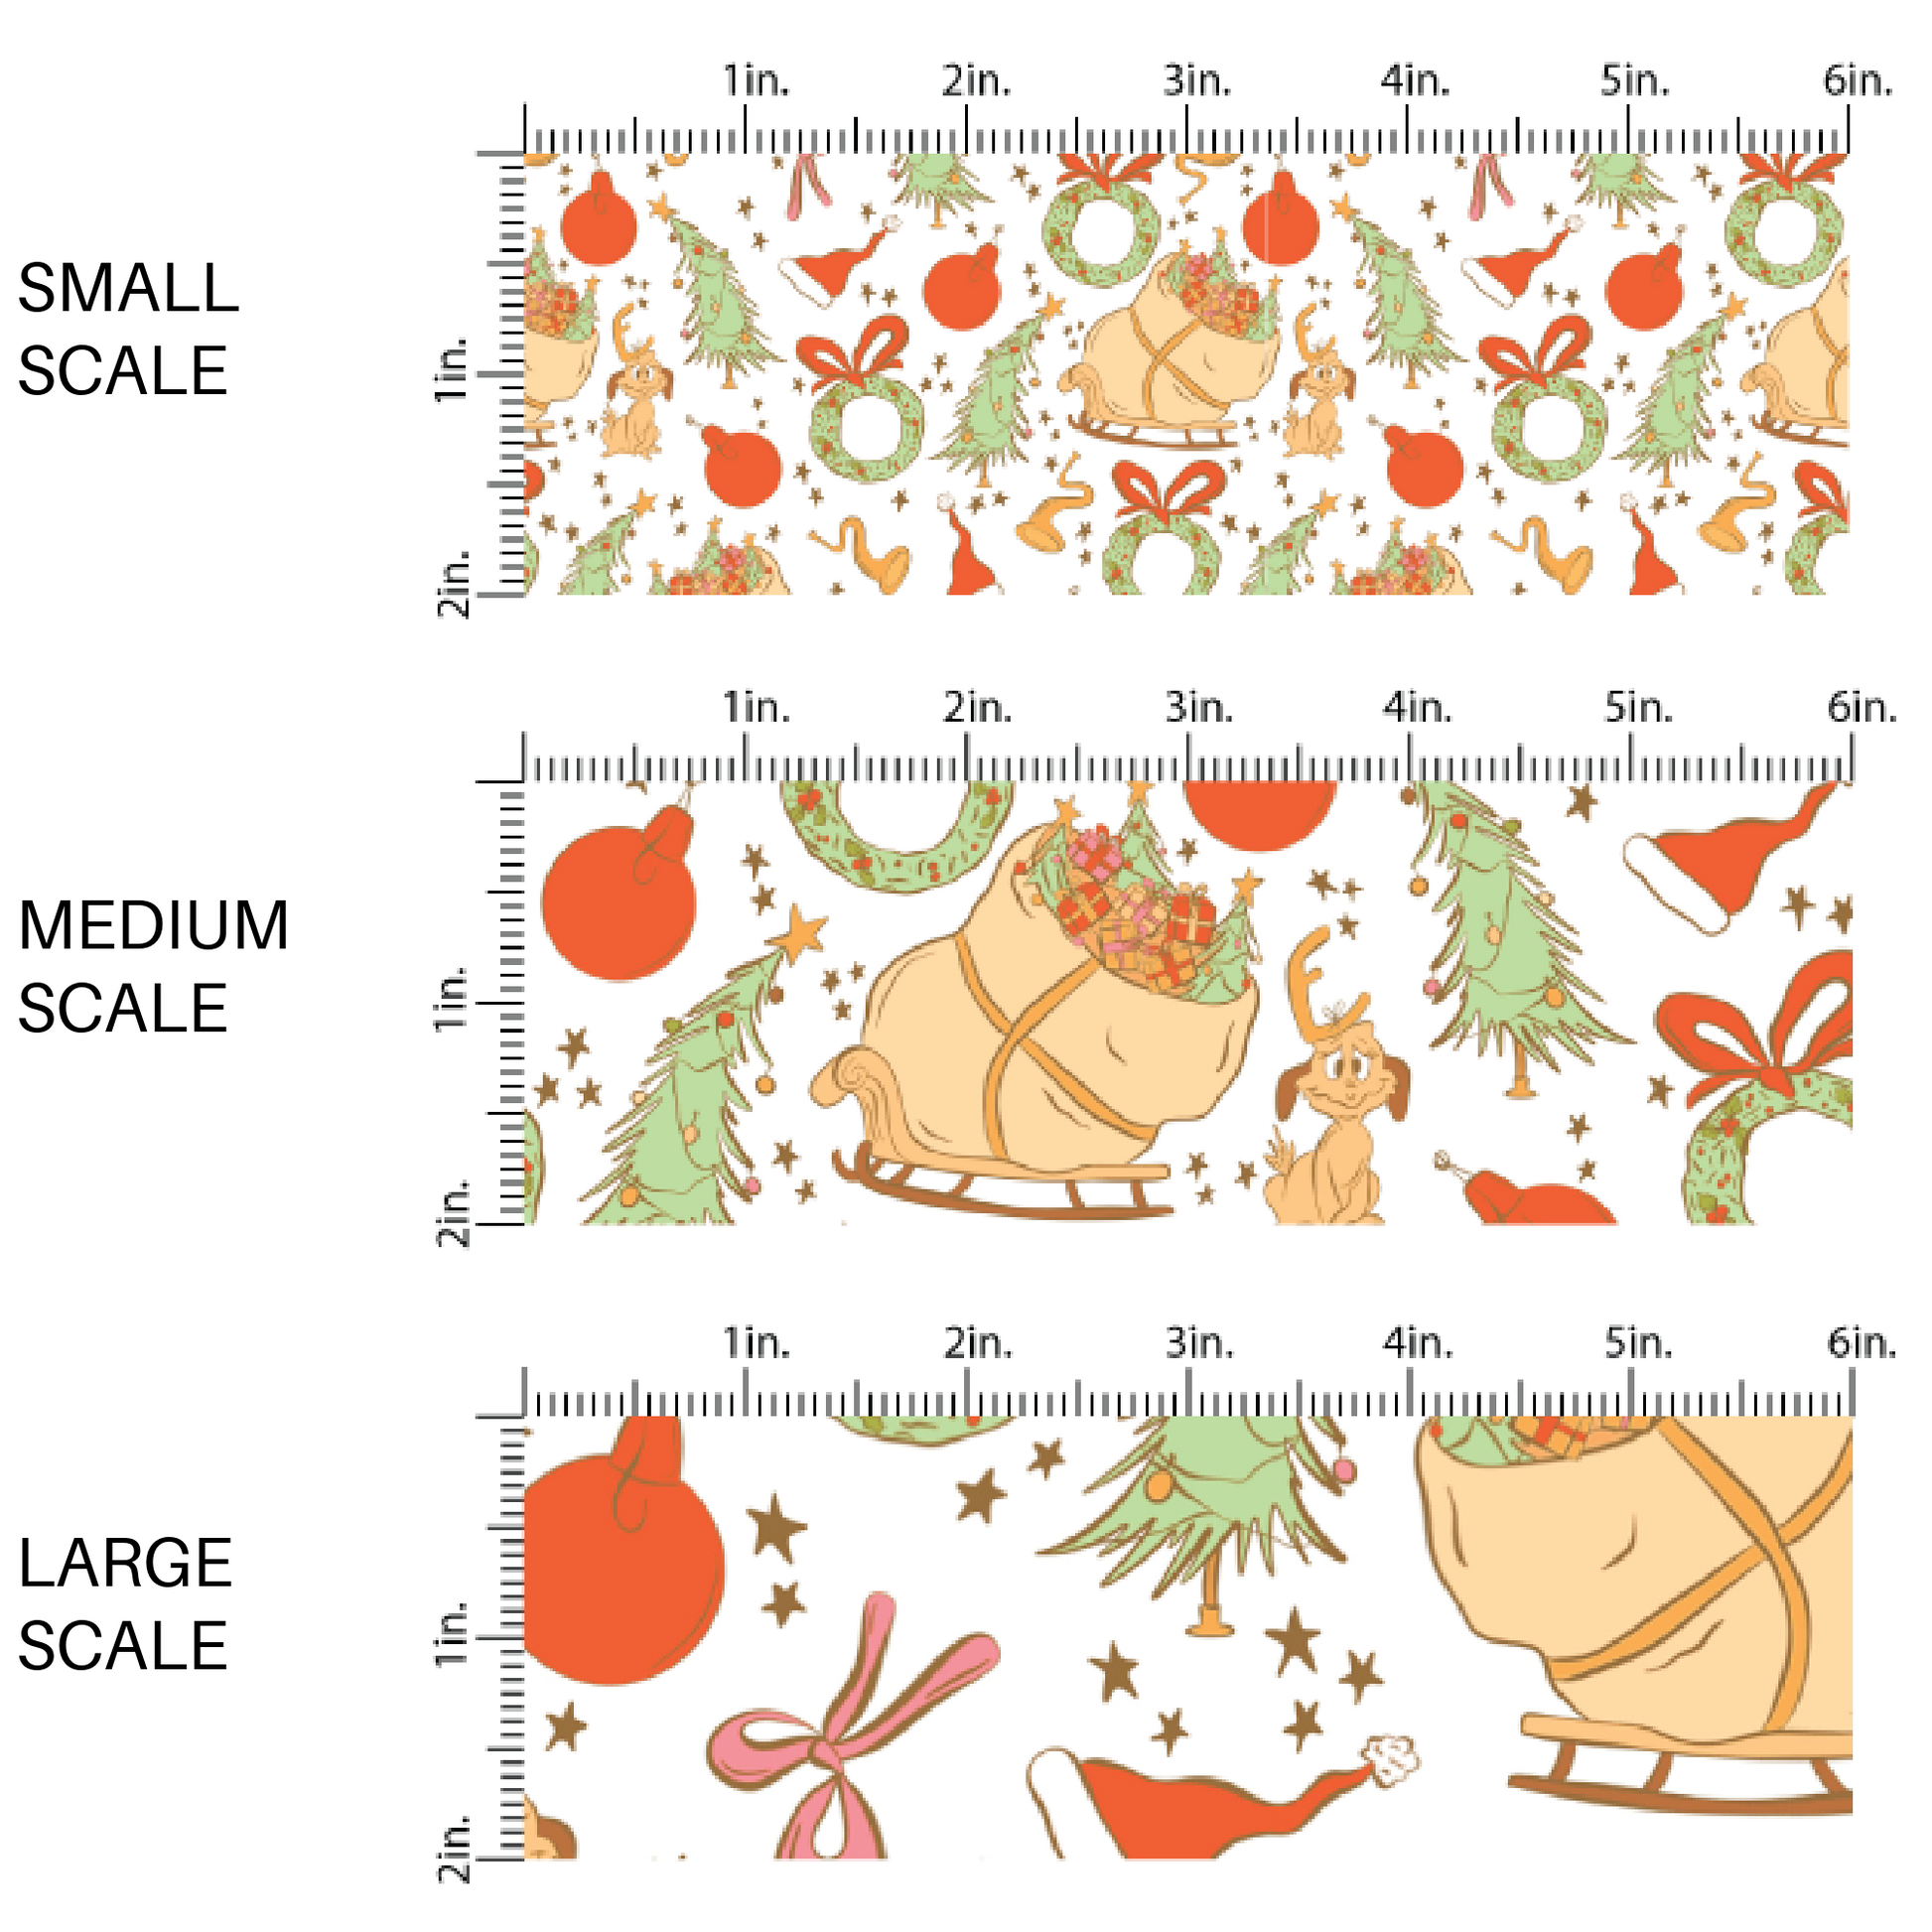 christmas movie Image with Santa Sleigh, Ornaments, and Christmas hats Image Guide for fabric